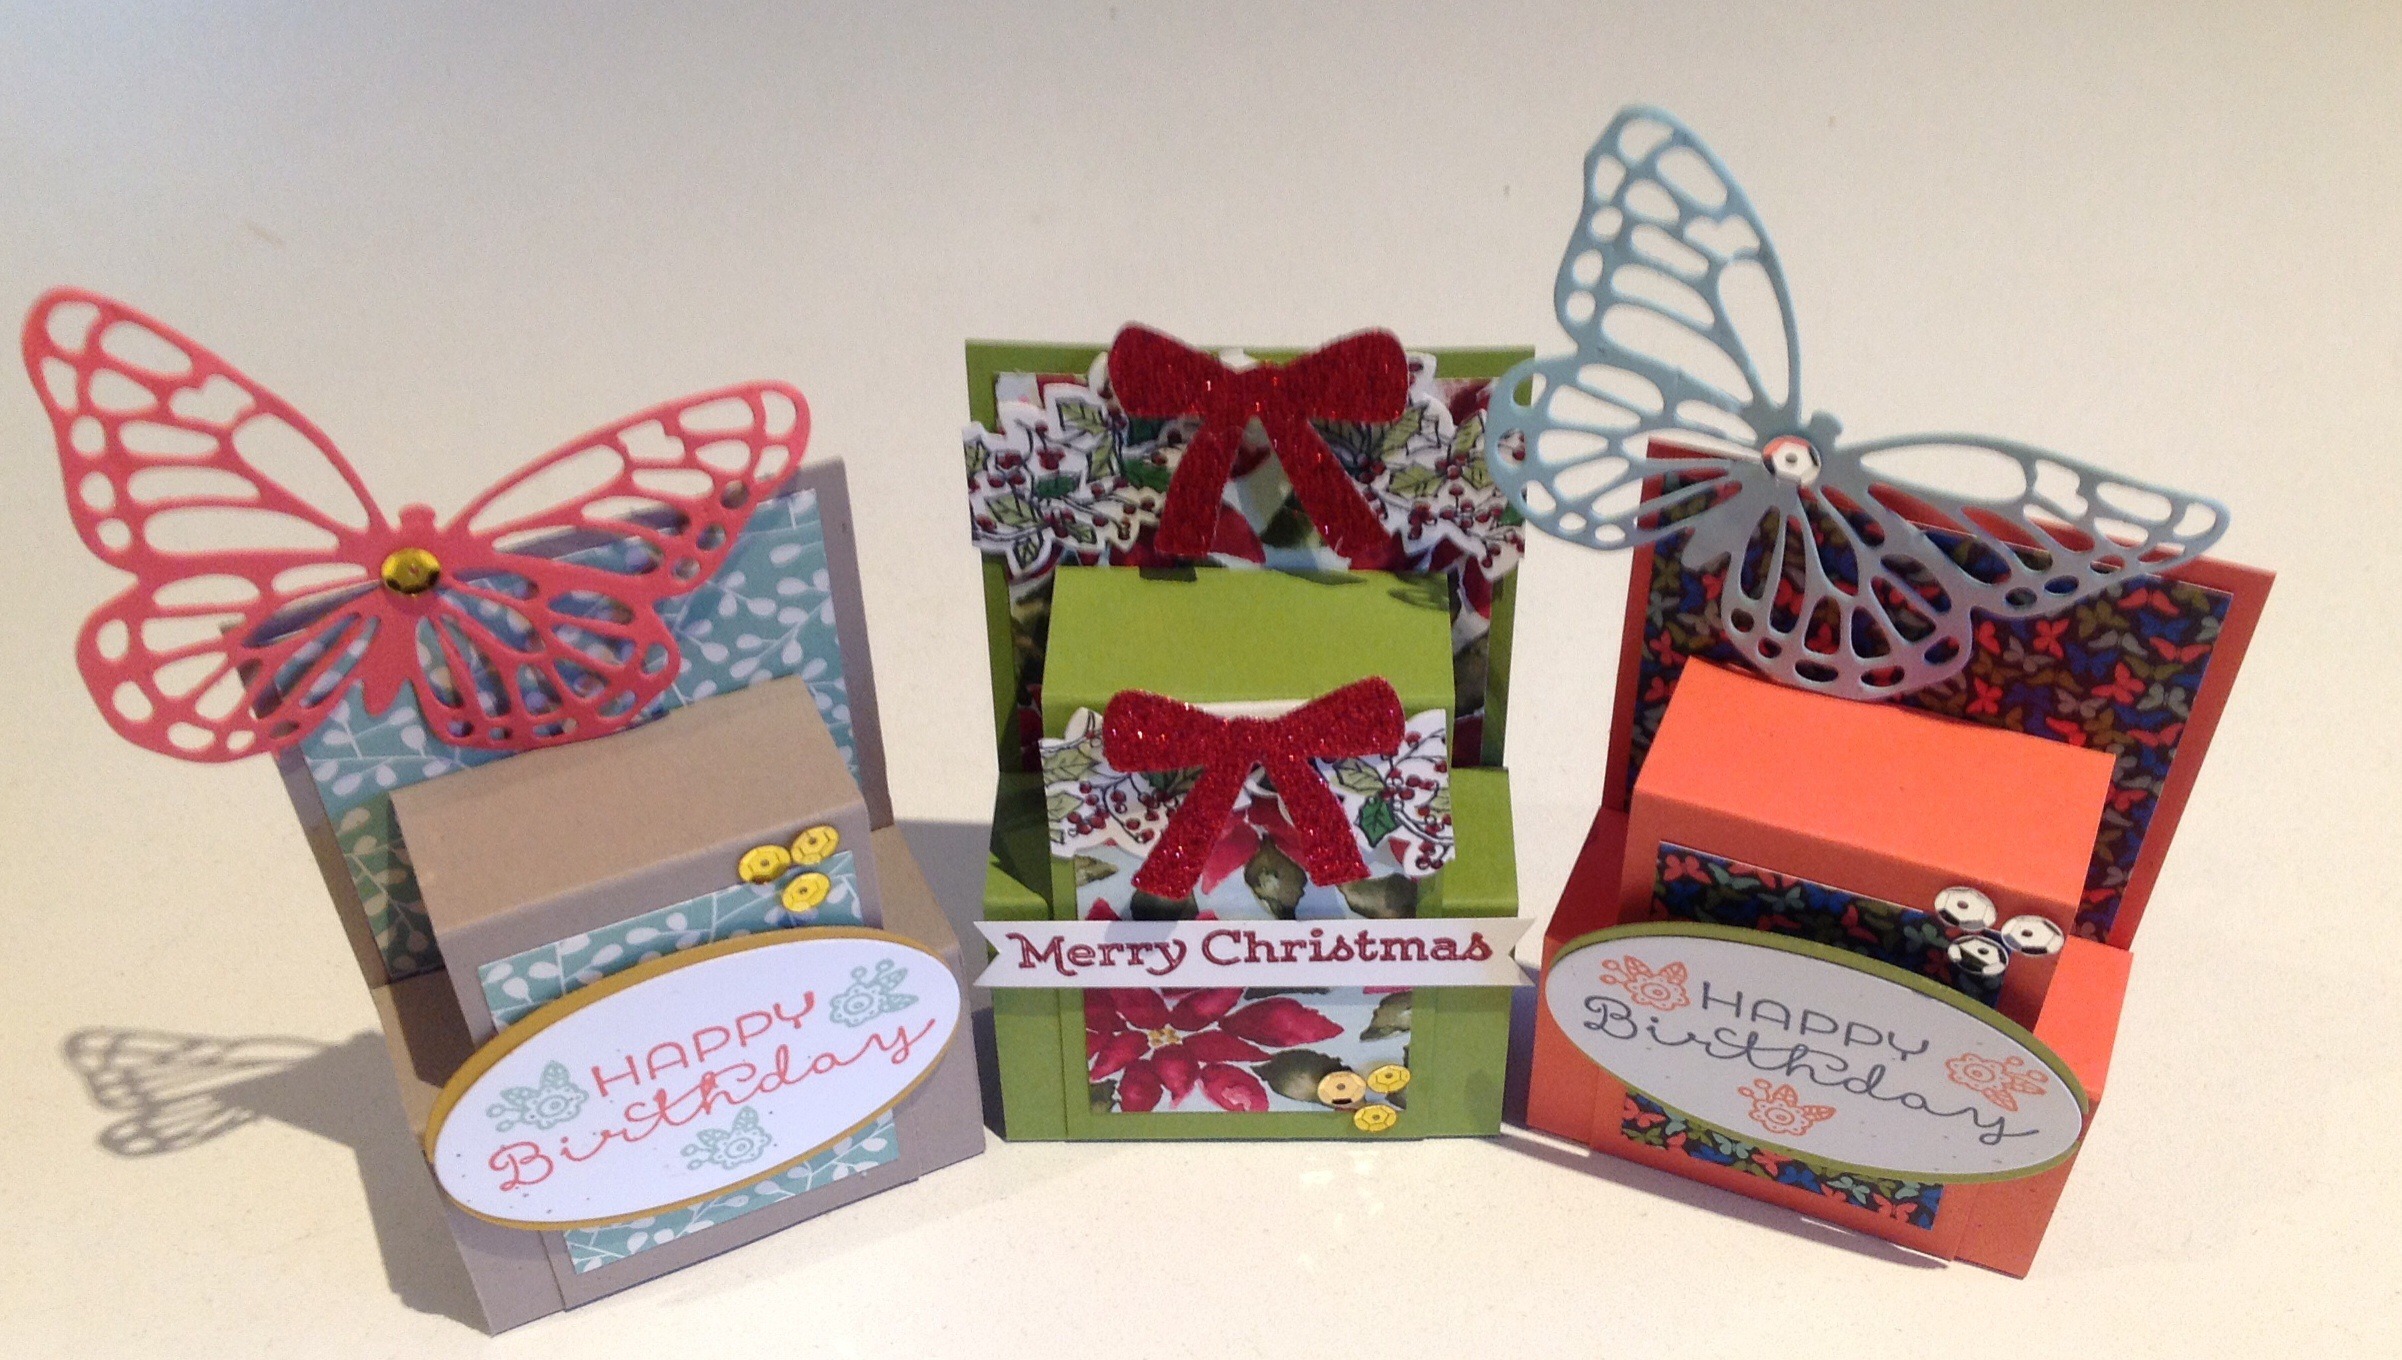 Step Panel cards using Designer Series paper (DSP) and butterfly die cuts.